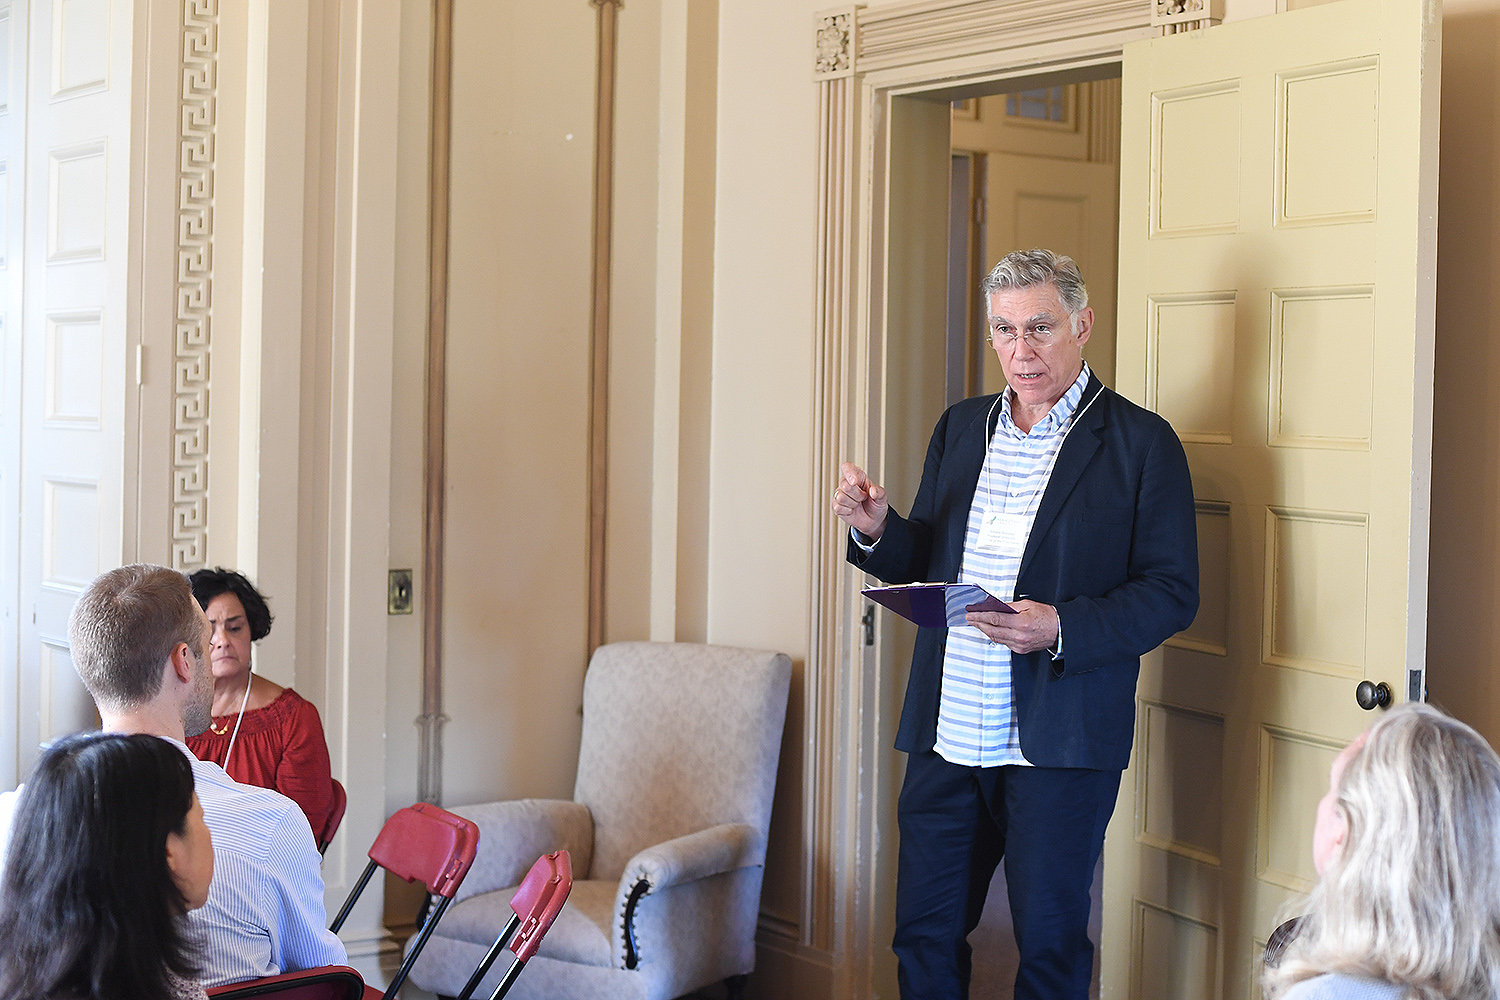 Antonio González, director of the Fries Center for Global Studies and Professor of Spanish, welcomed the conference participants to Wesleyan. 